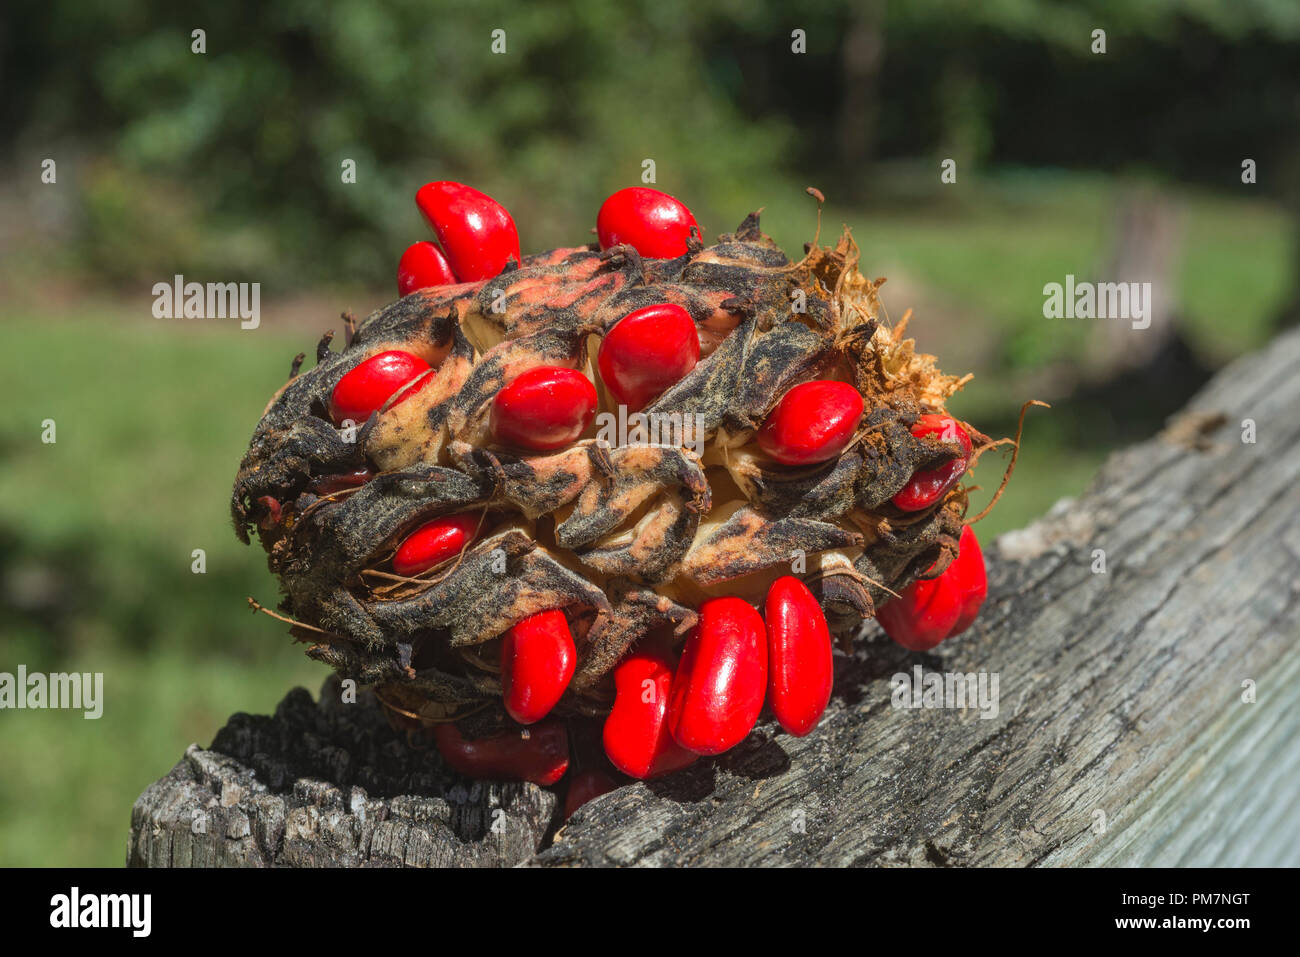 Magnolia Grandiflora or Southern Magnolia seed pod with large bright red, ripe seeds.. Stock Photo